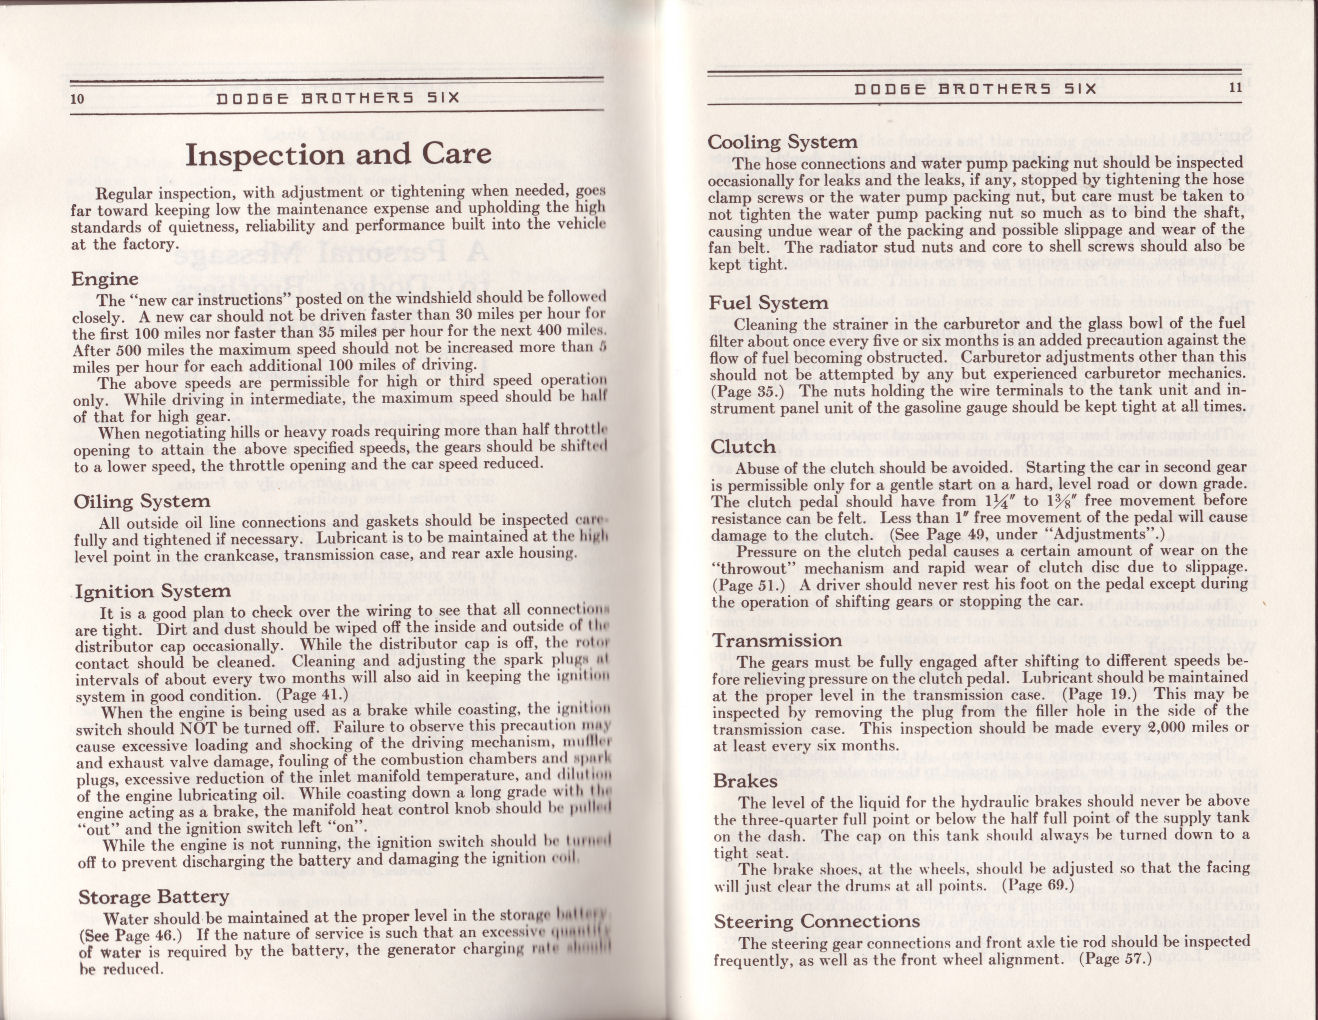 1930 Dodge Six Instruction Book Page 42